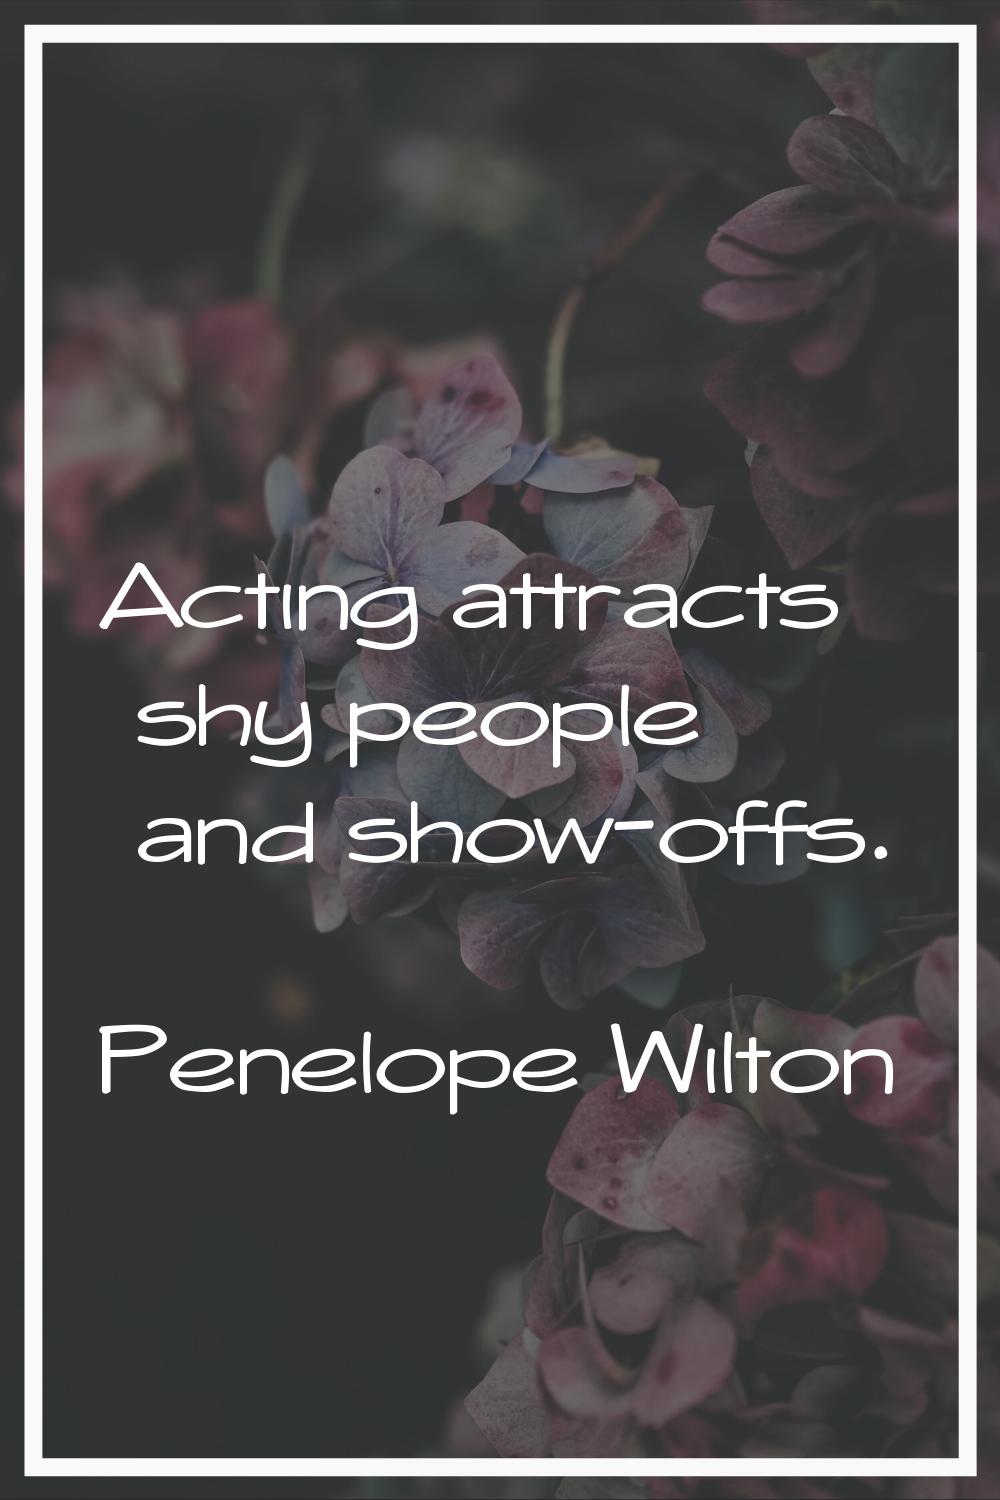 Acting attracts shy people and show-offs.